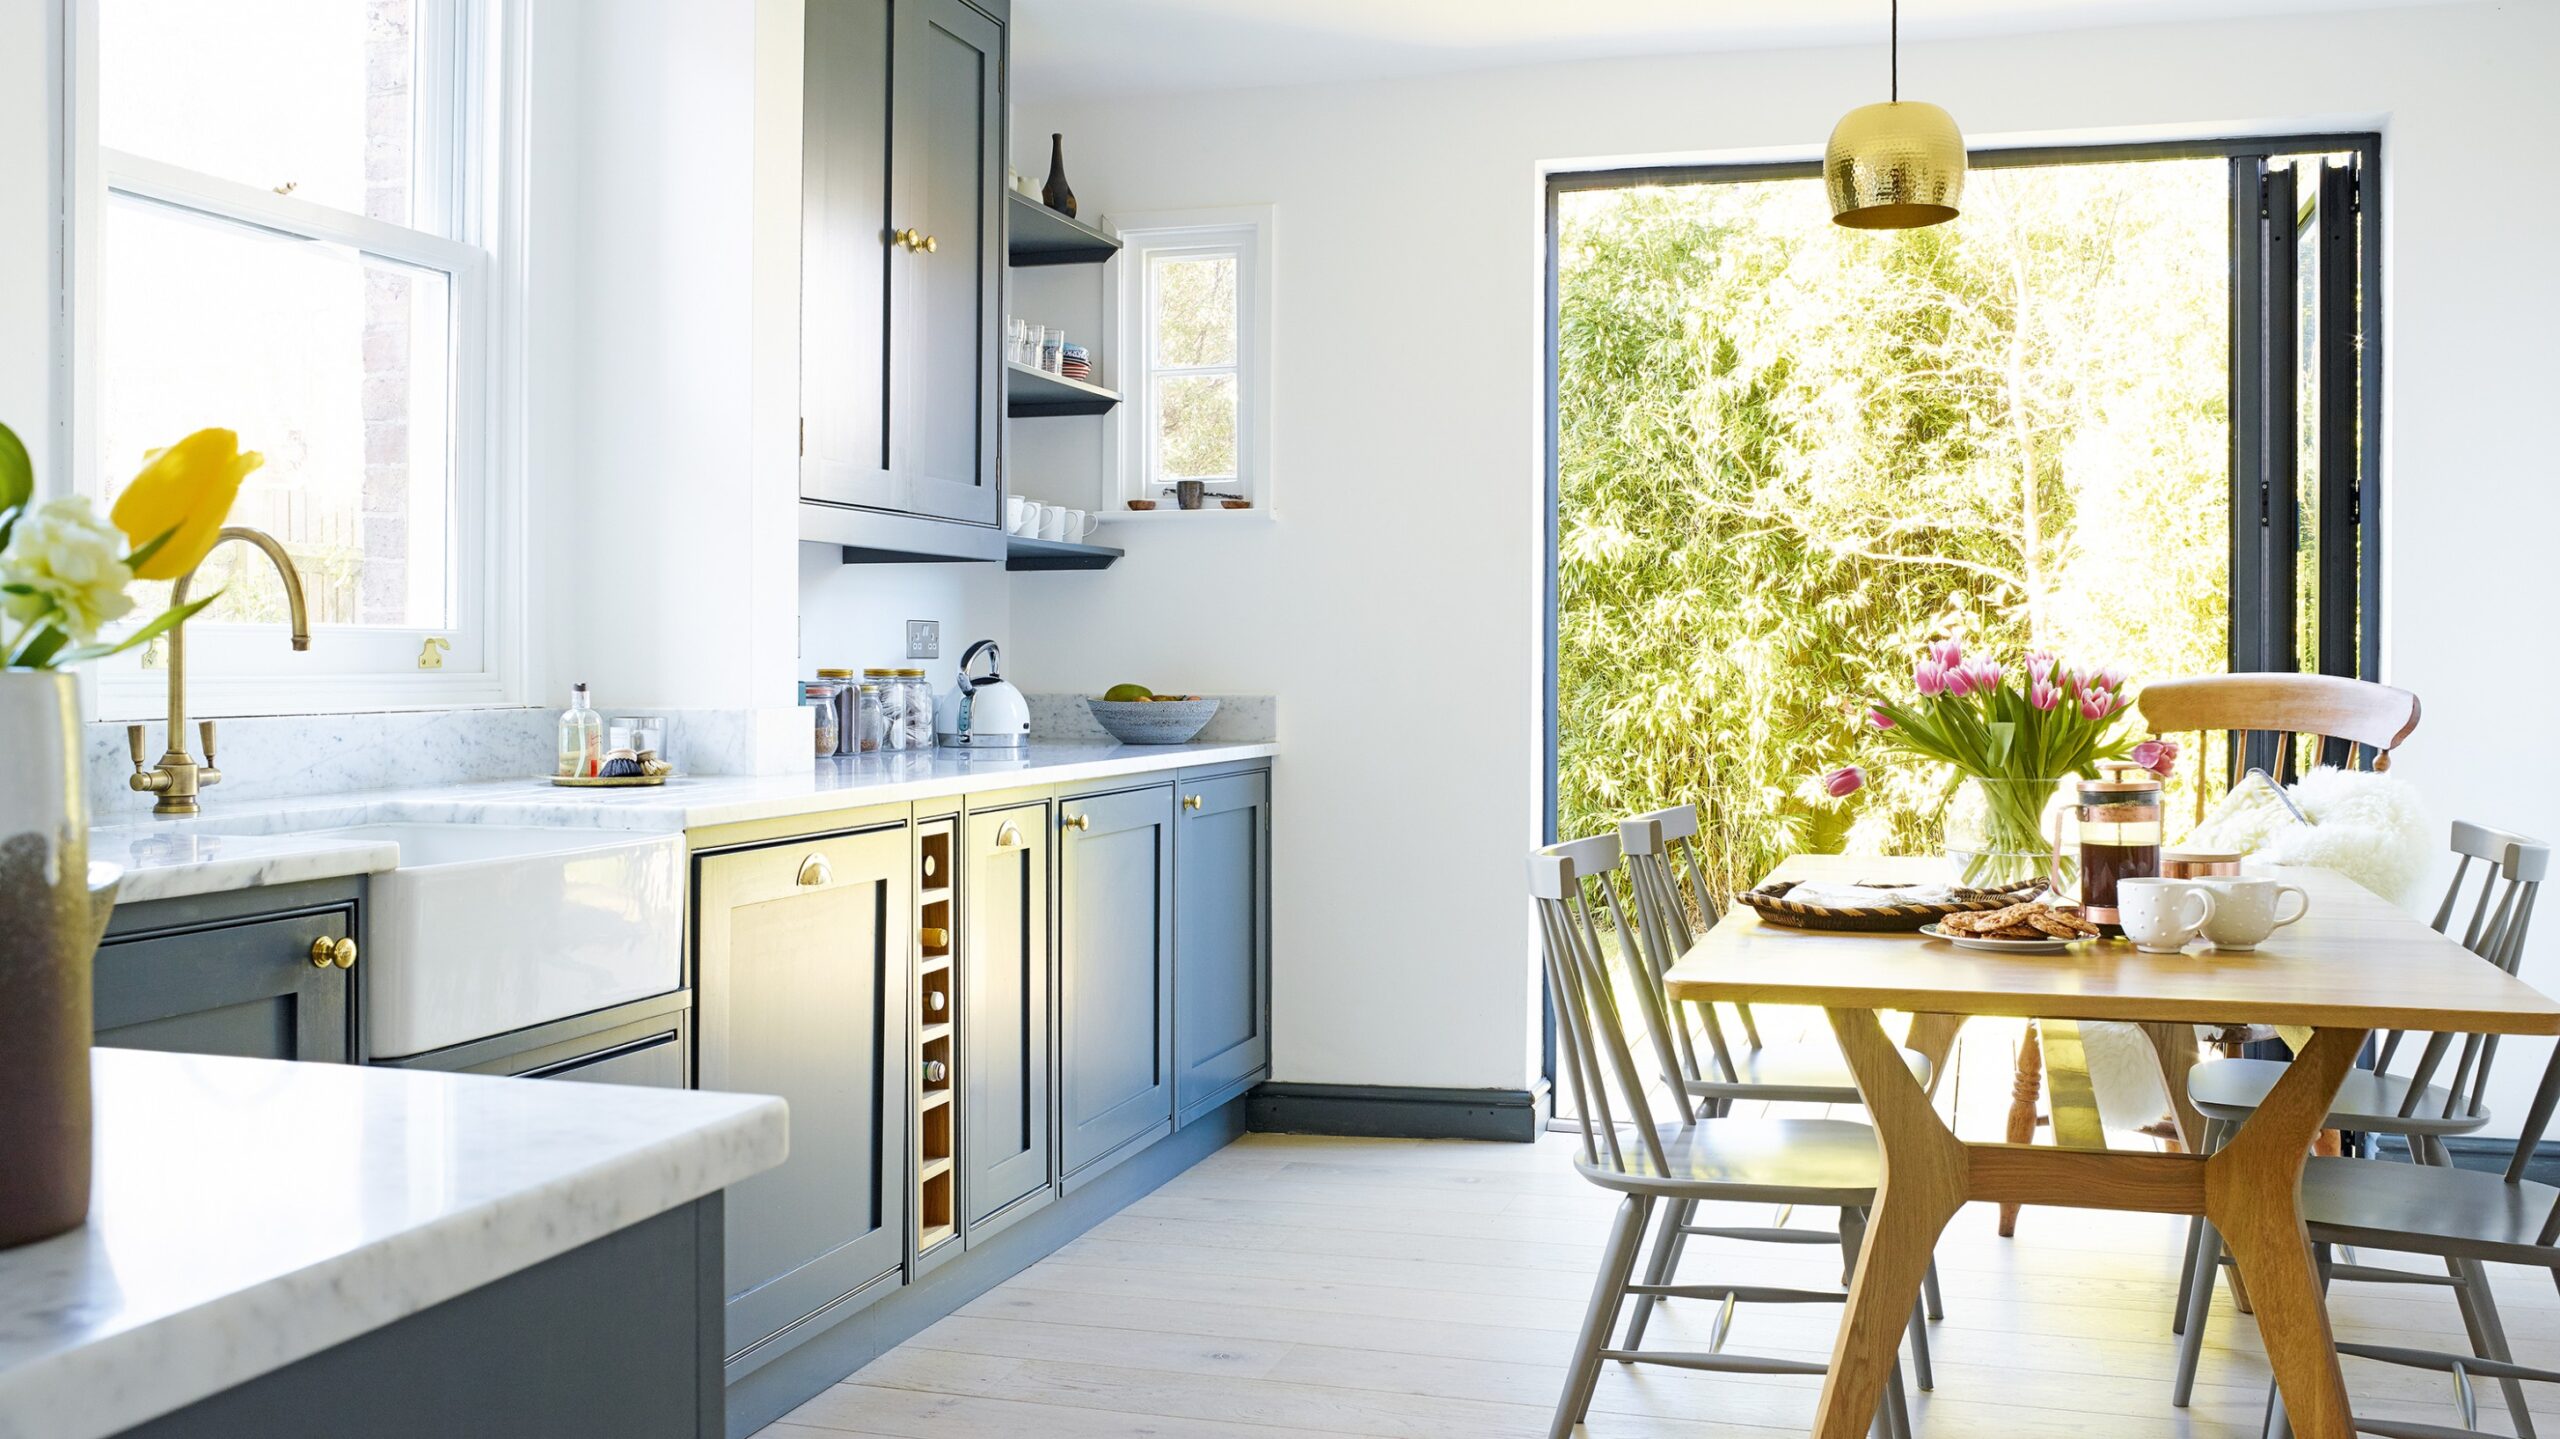 How to make a small kitchen look bigger – 4 expert tips and  - what color to paint a small kitchen to make it look bigger?